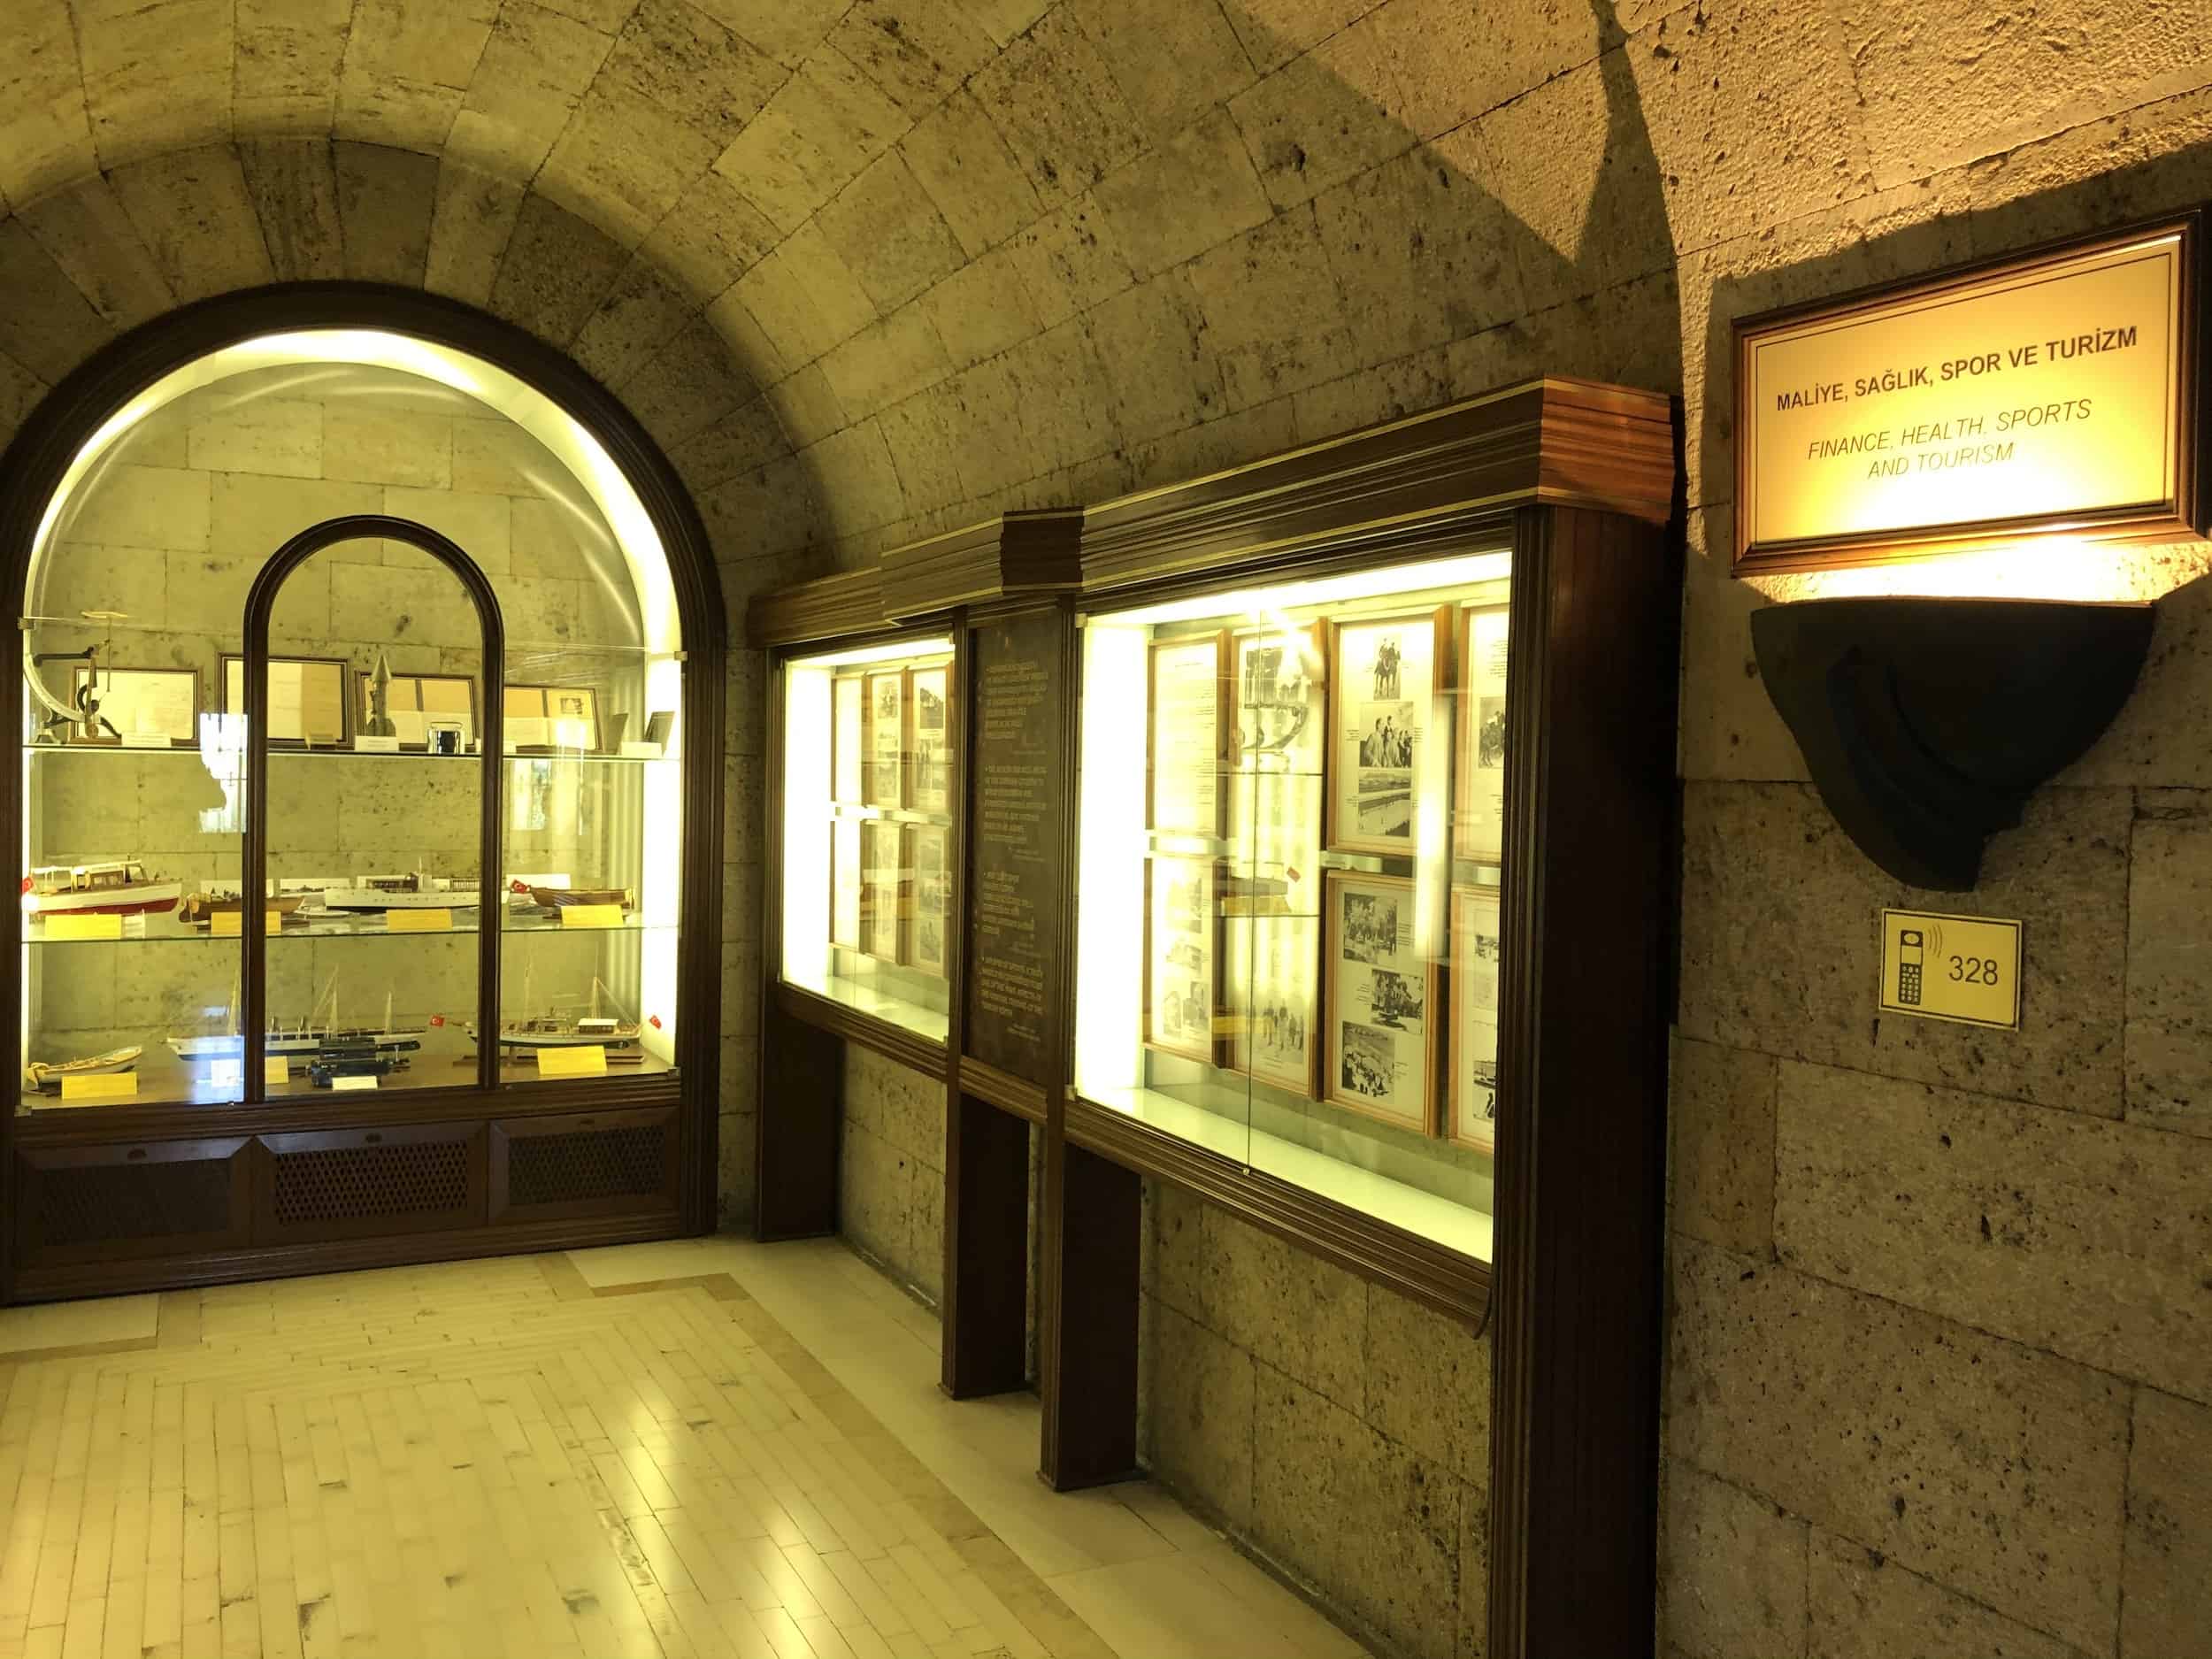 Finance, health, sports, and tourism at the Atatürk and War of Independence Museum at Anıtkabir in Ankara, Turkey